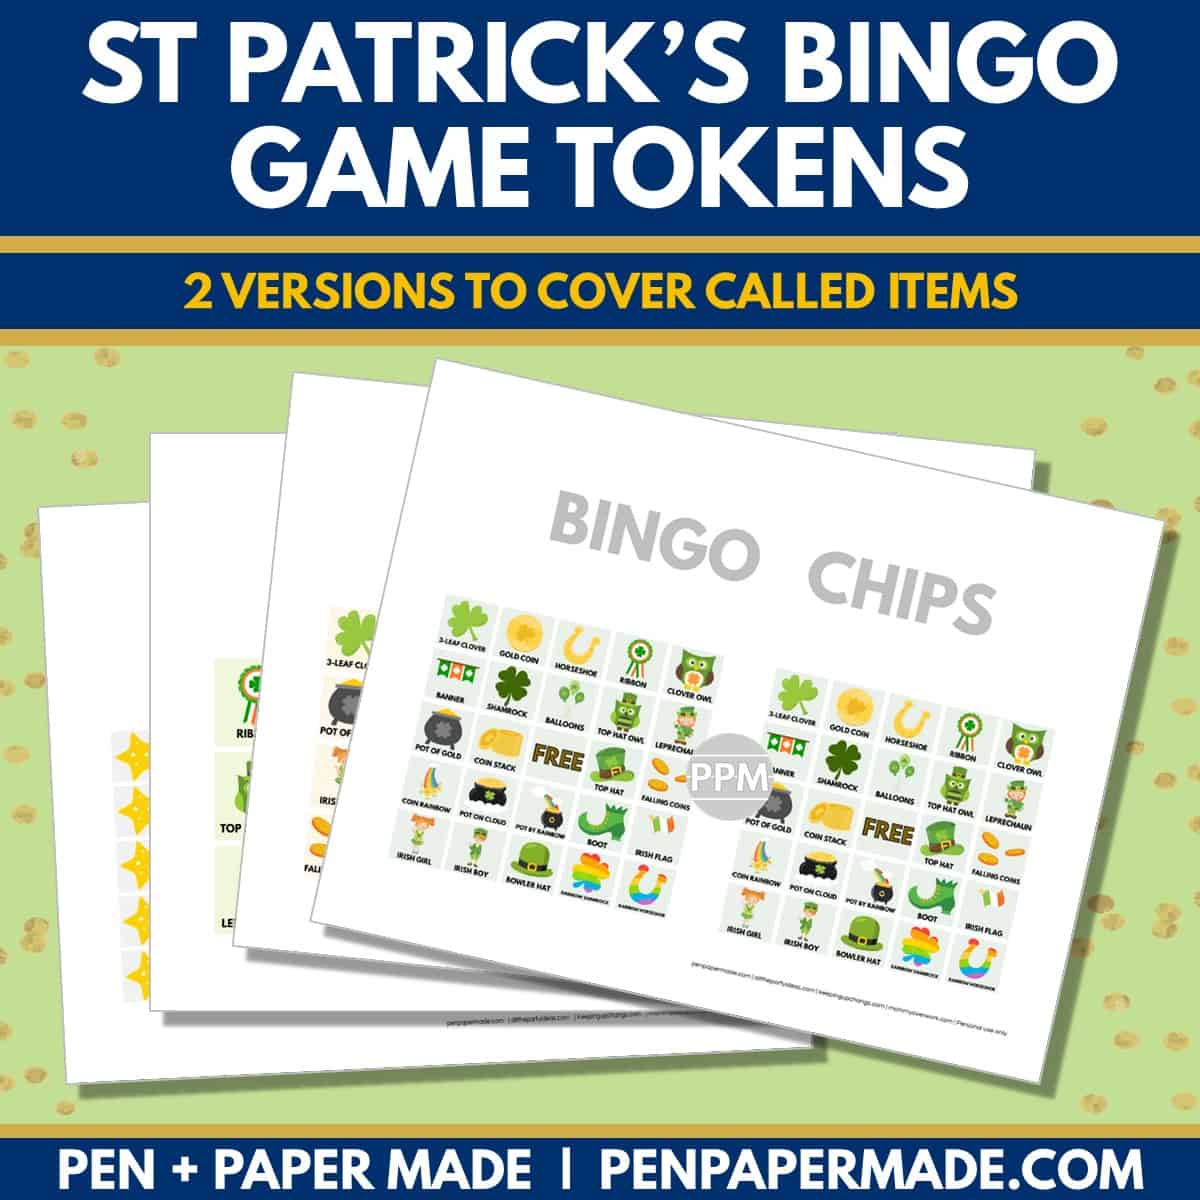 st. patrick's day bingo card 5x5, 4x4, 3x3 game chips, tokens, markers.